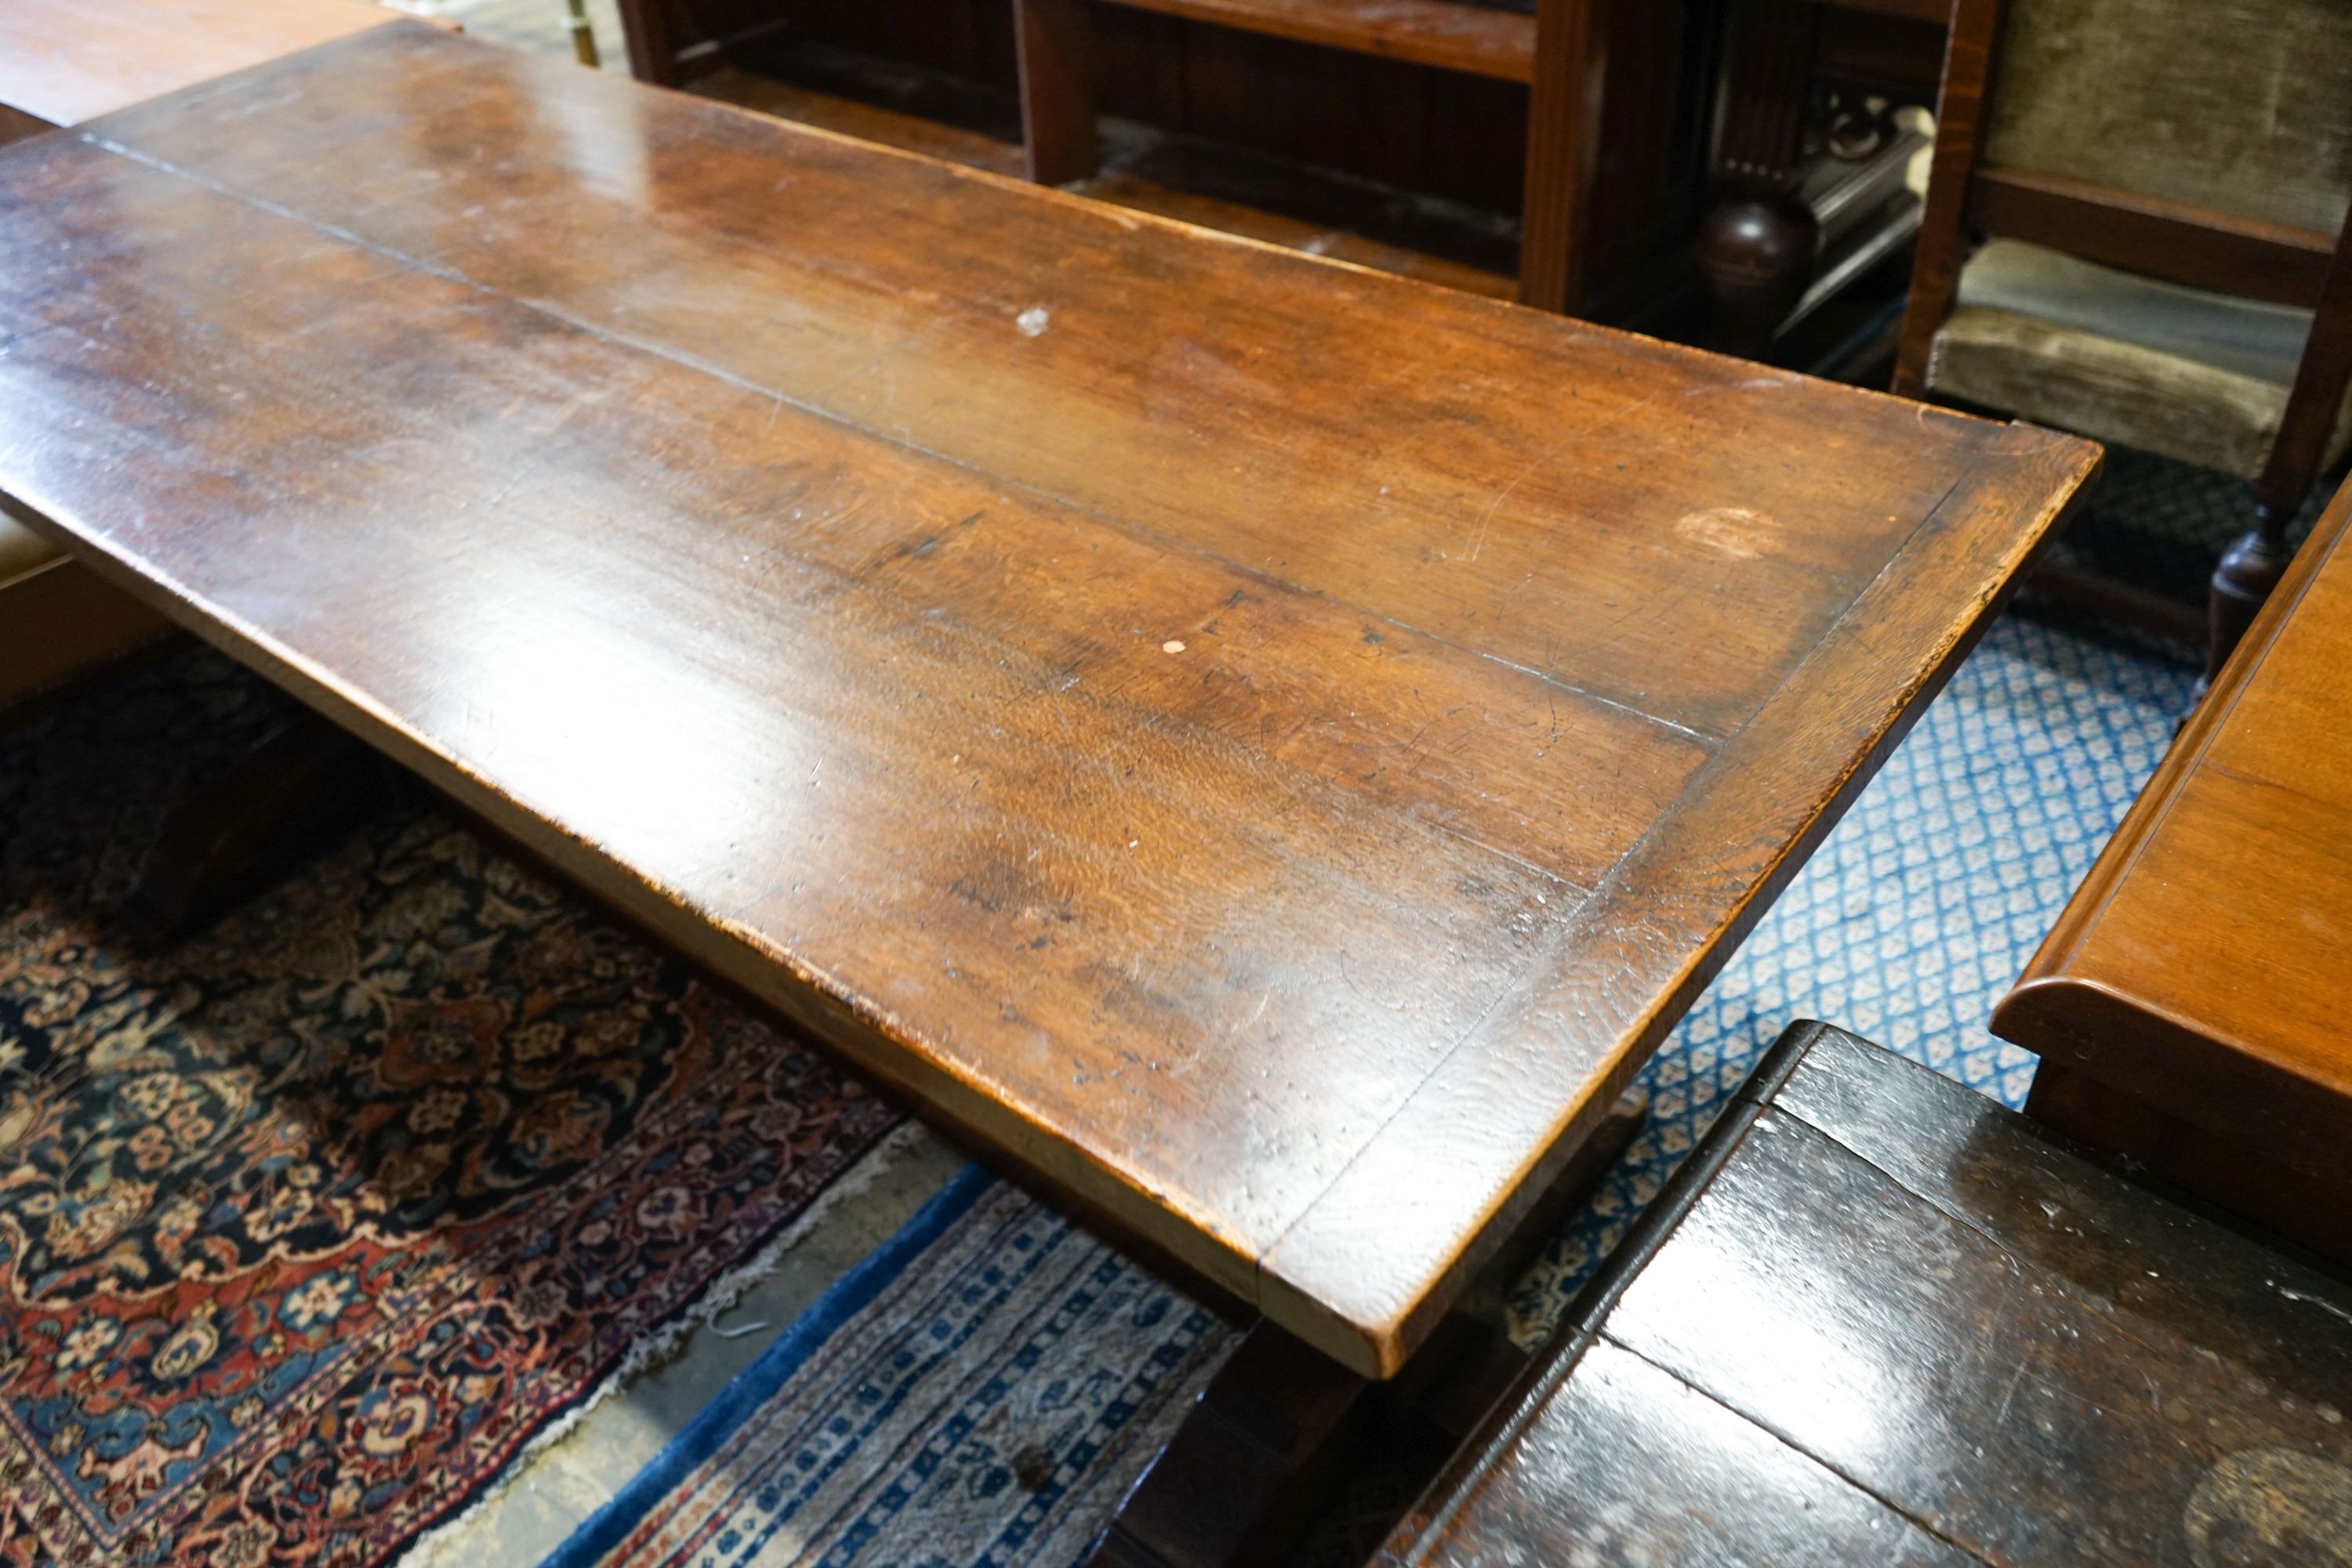 A 17th century style carved rectangular oak refectory table